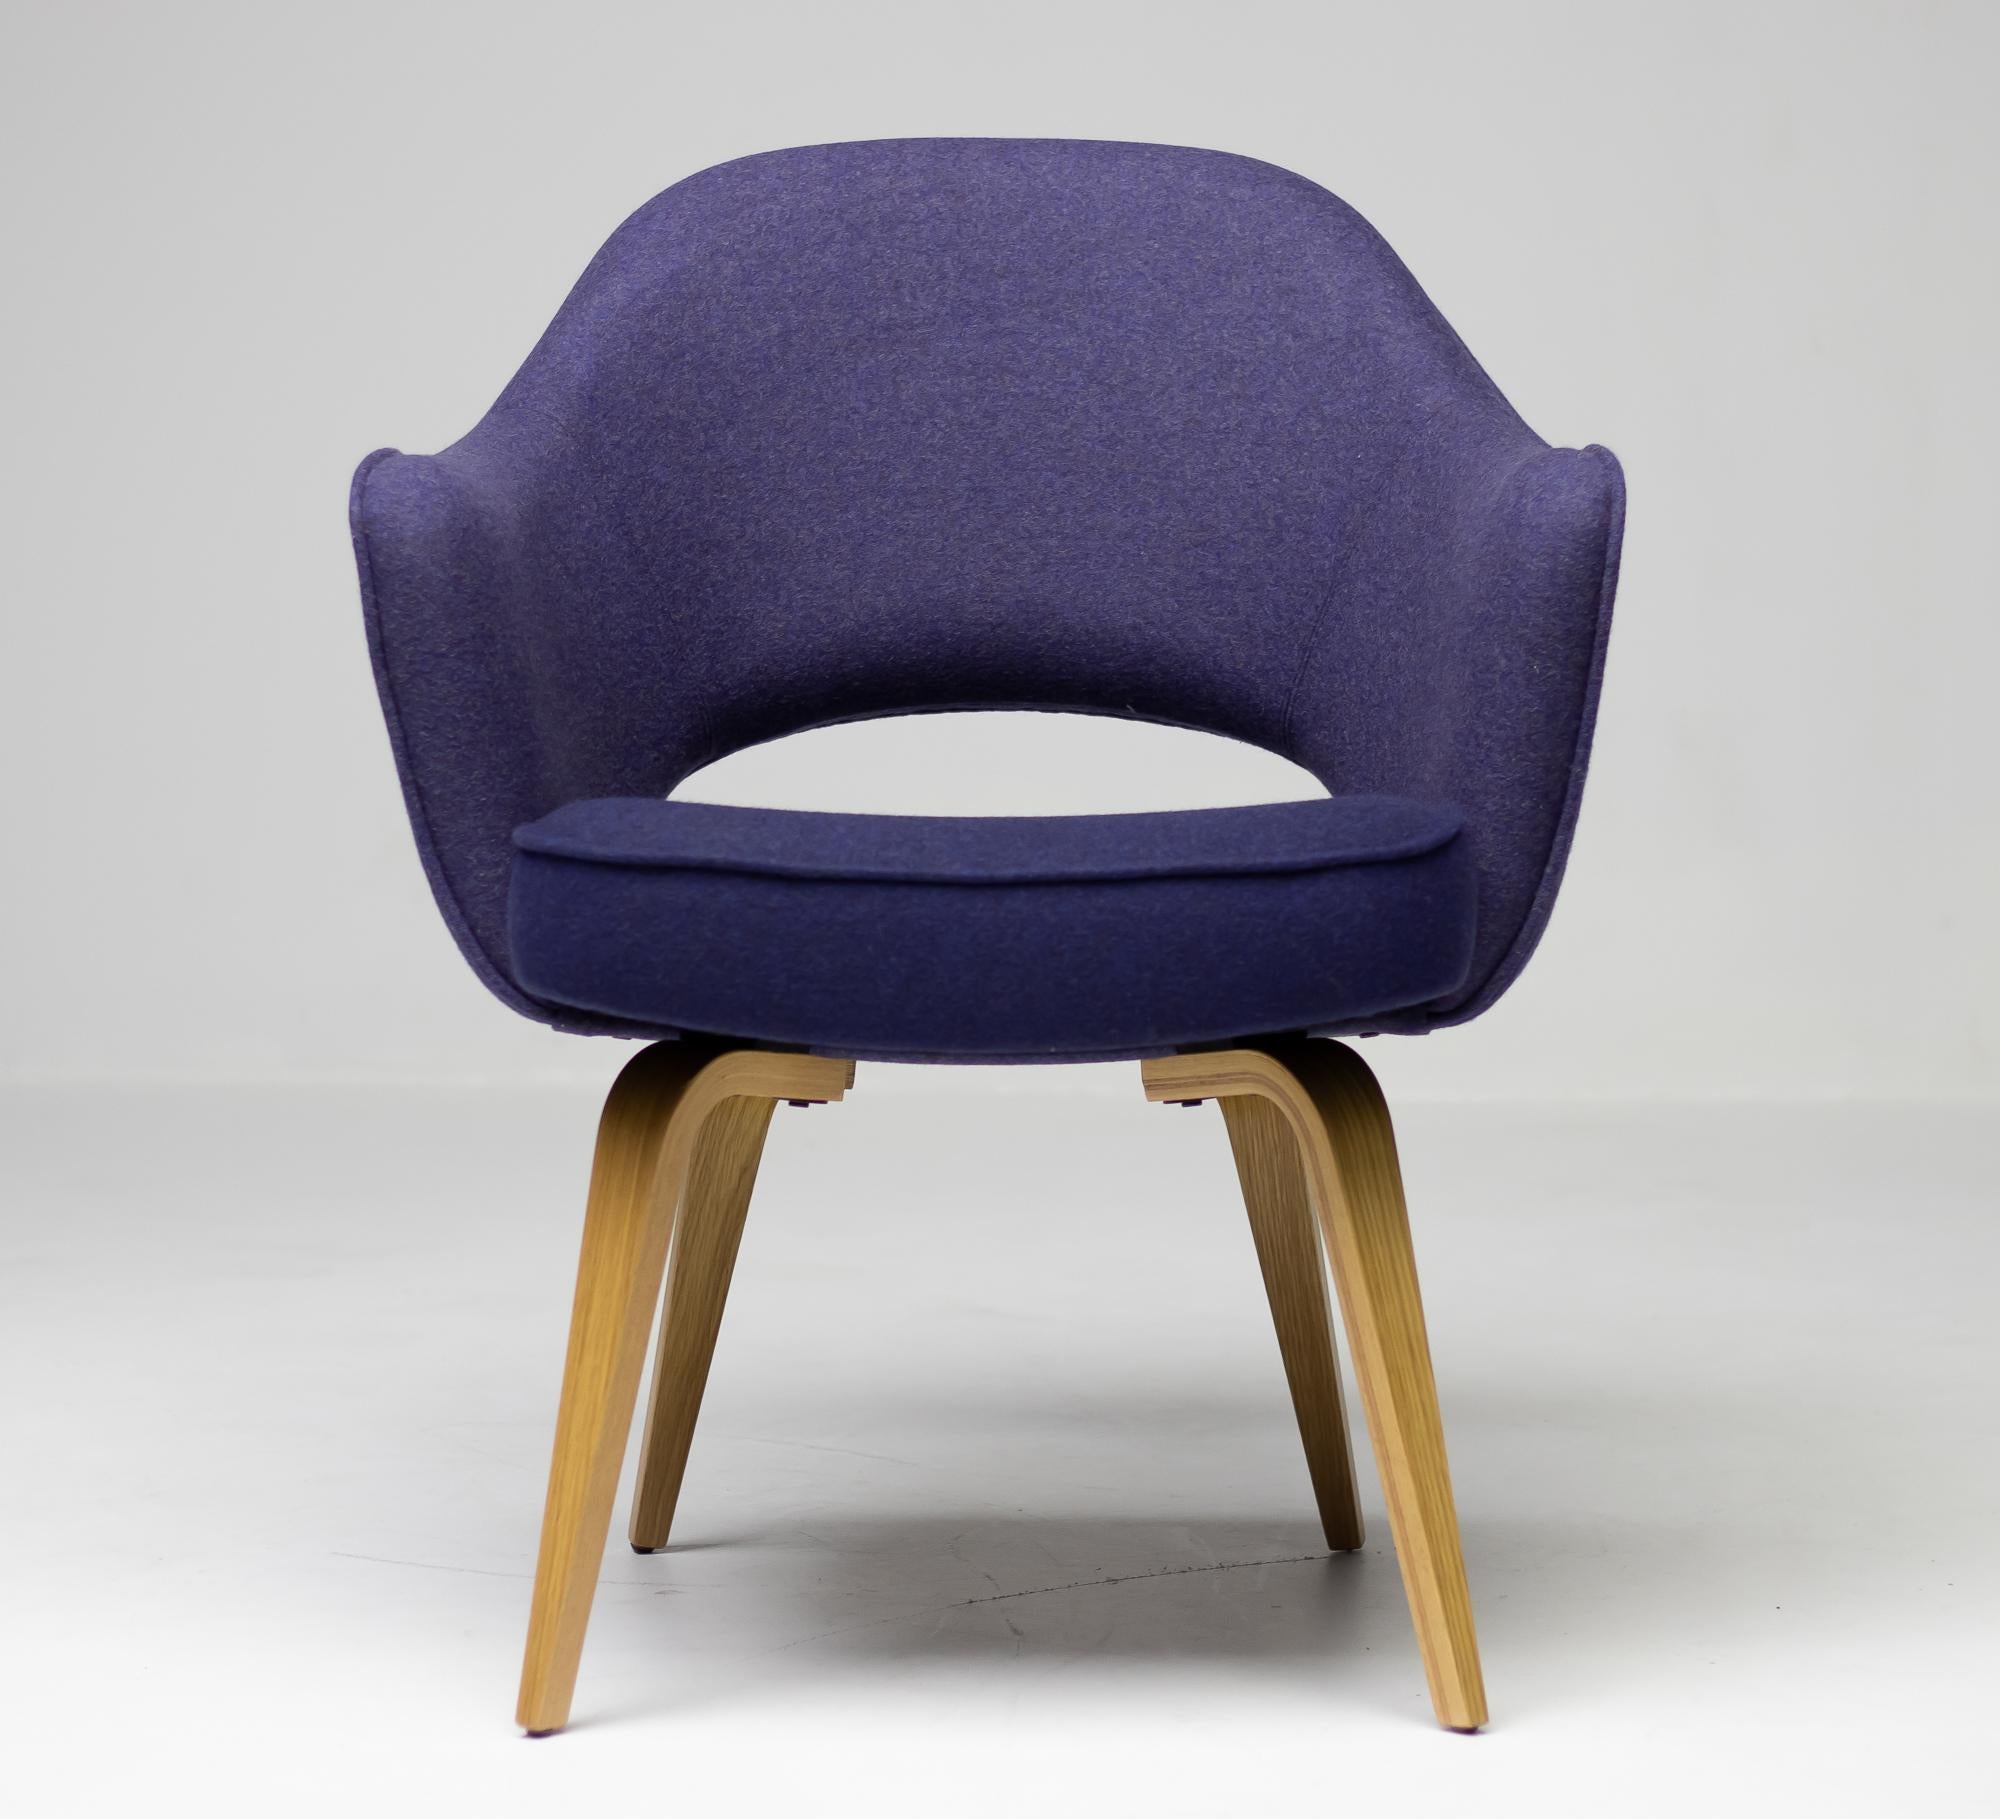 Executive armchair by Eero Saarinen with bent plywood legs, upholstered in 2-tone purple Kvadrat Divina Melange felt.
Marked with Knoll label at the bottom.